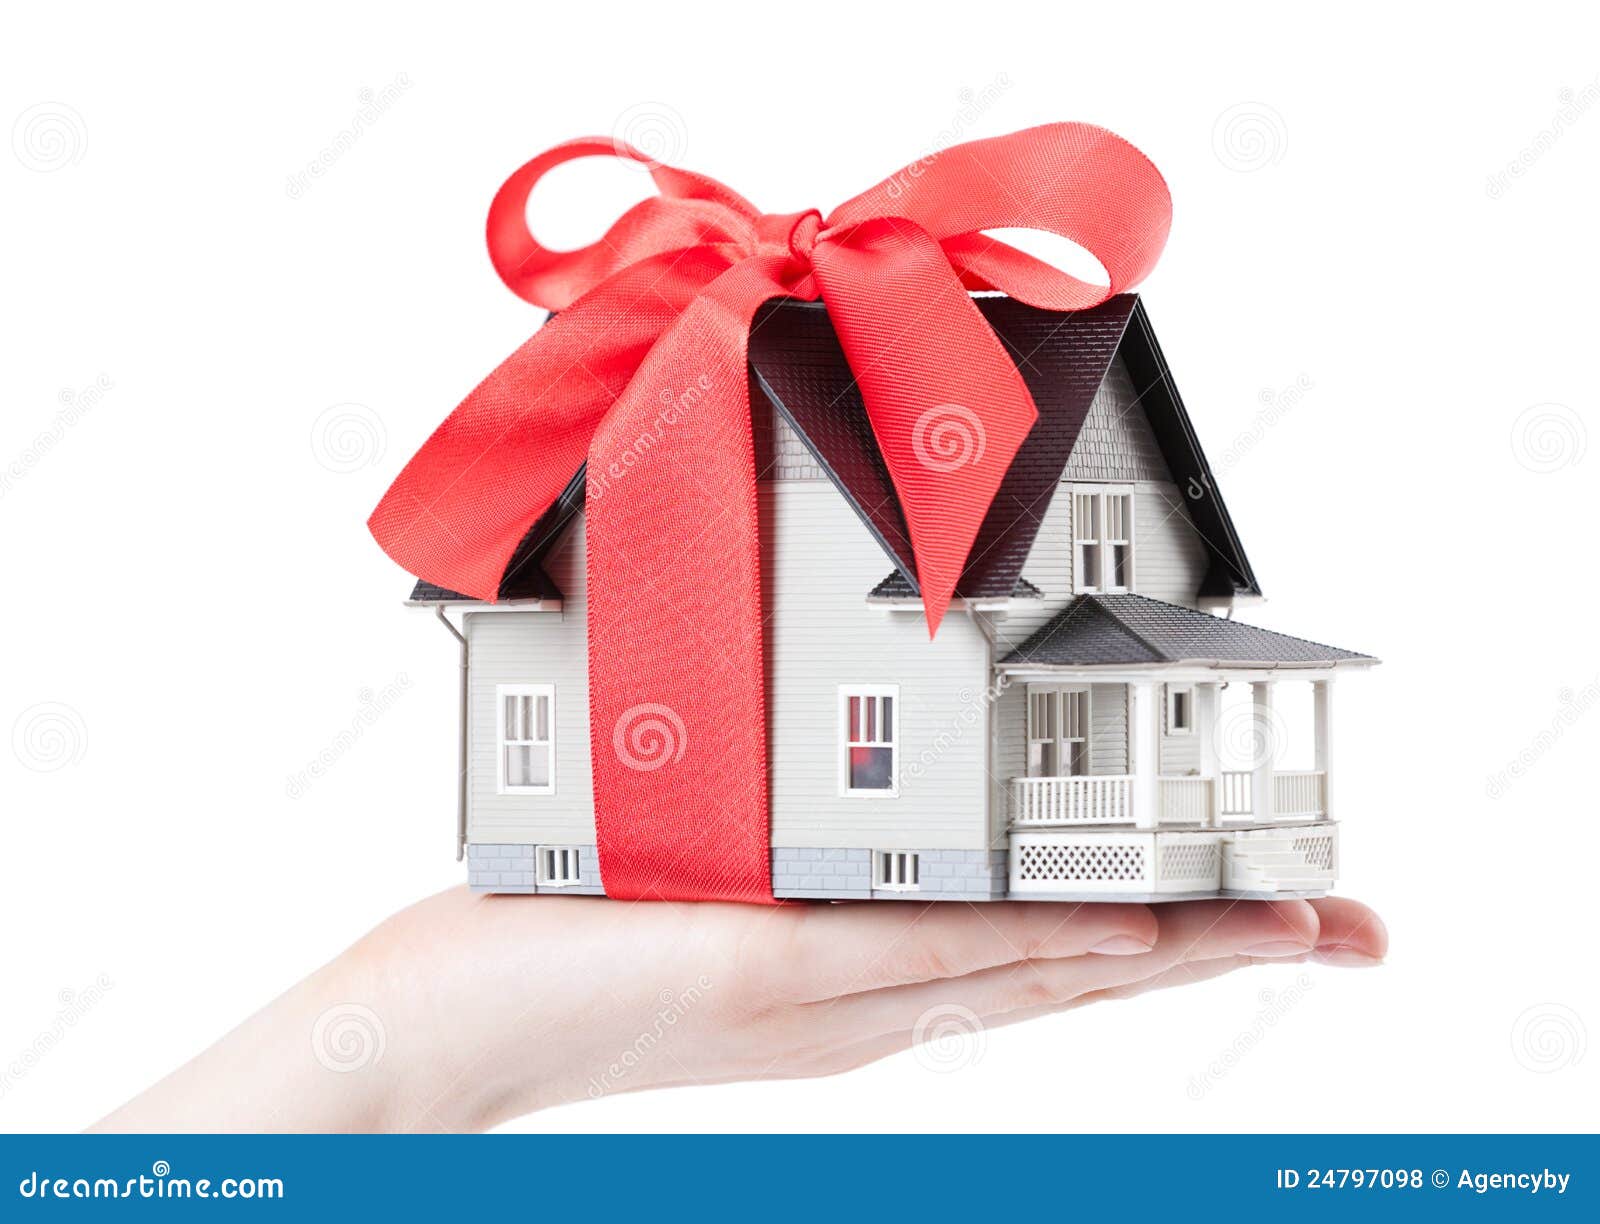 hands holding house clipart - photo #33